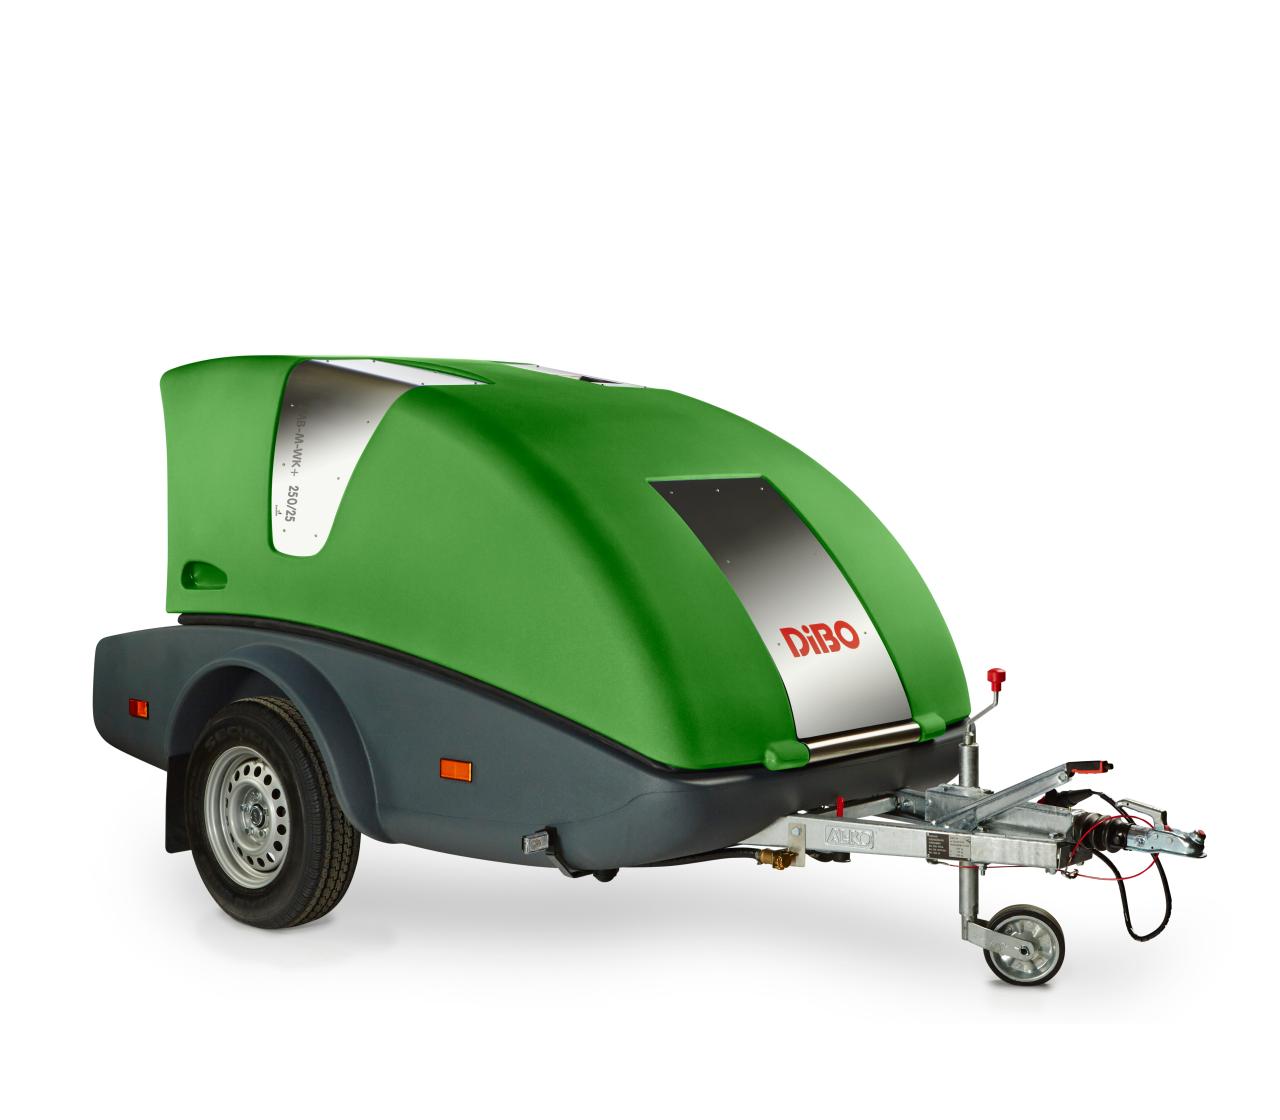 DiBO JMB-M-WK+ eco-friendly moss & weed killer on trailer equipped with the most modern & green technologies